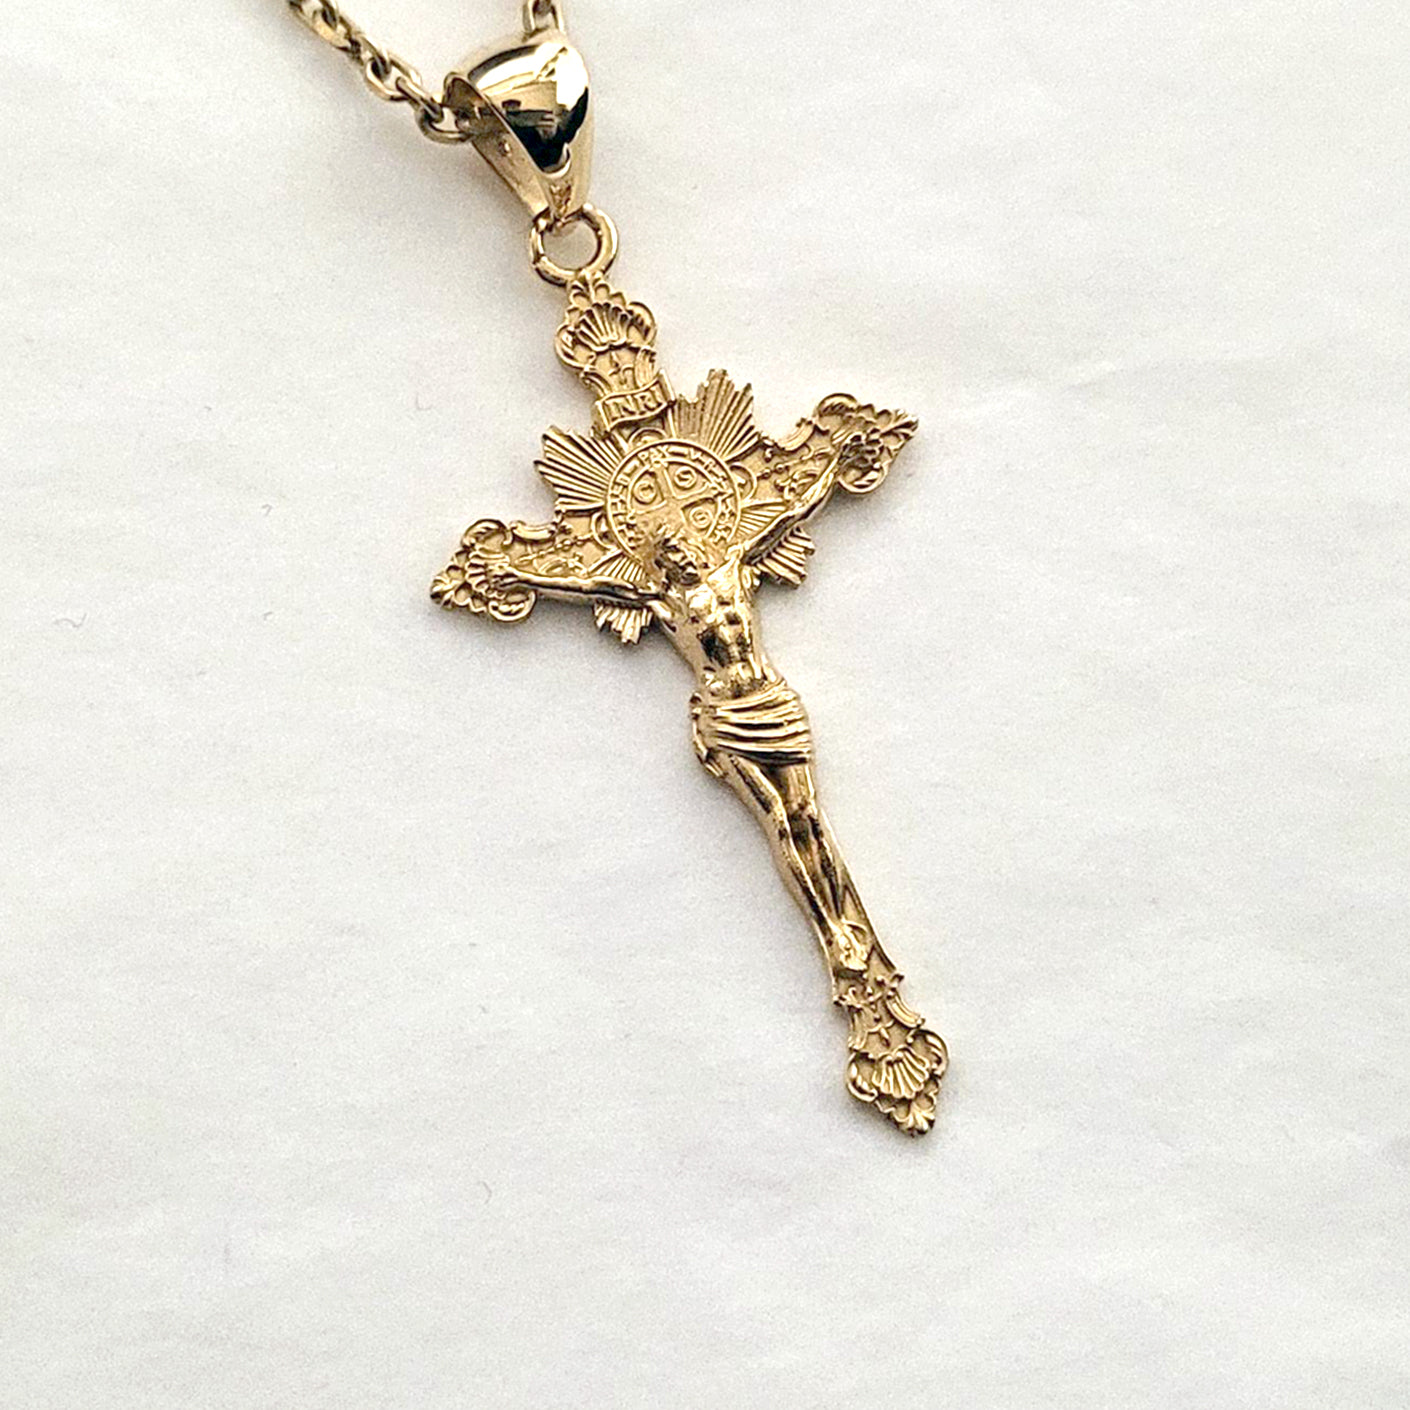 Never say Never Western Cross Necklace 18K Yellow Gold Women Men |  Religious Latin Crucifix Pendant Chain 50cm | 3.05g Real Gold | Italian  Fine Jewelry | Gift Holy Communion Teens | Amazon.com